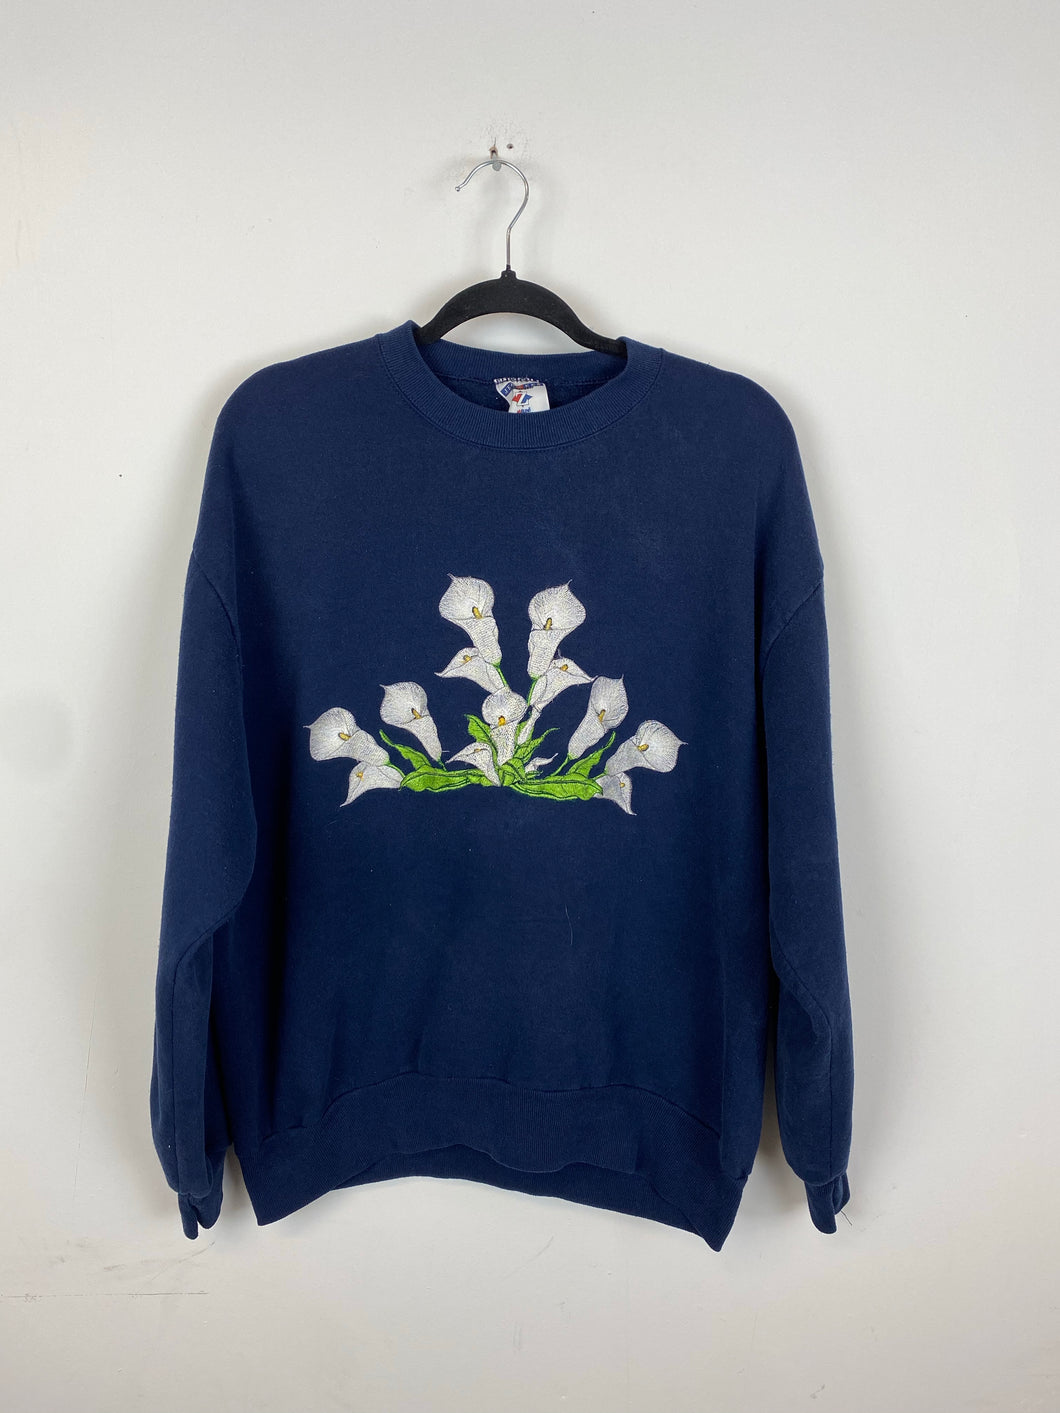 90s Embroidered Flower crewneck - S